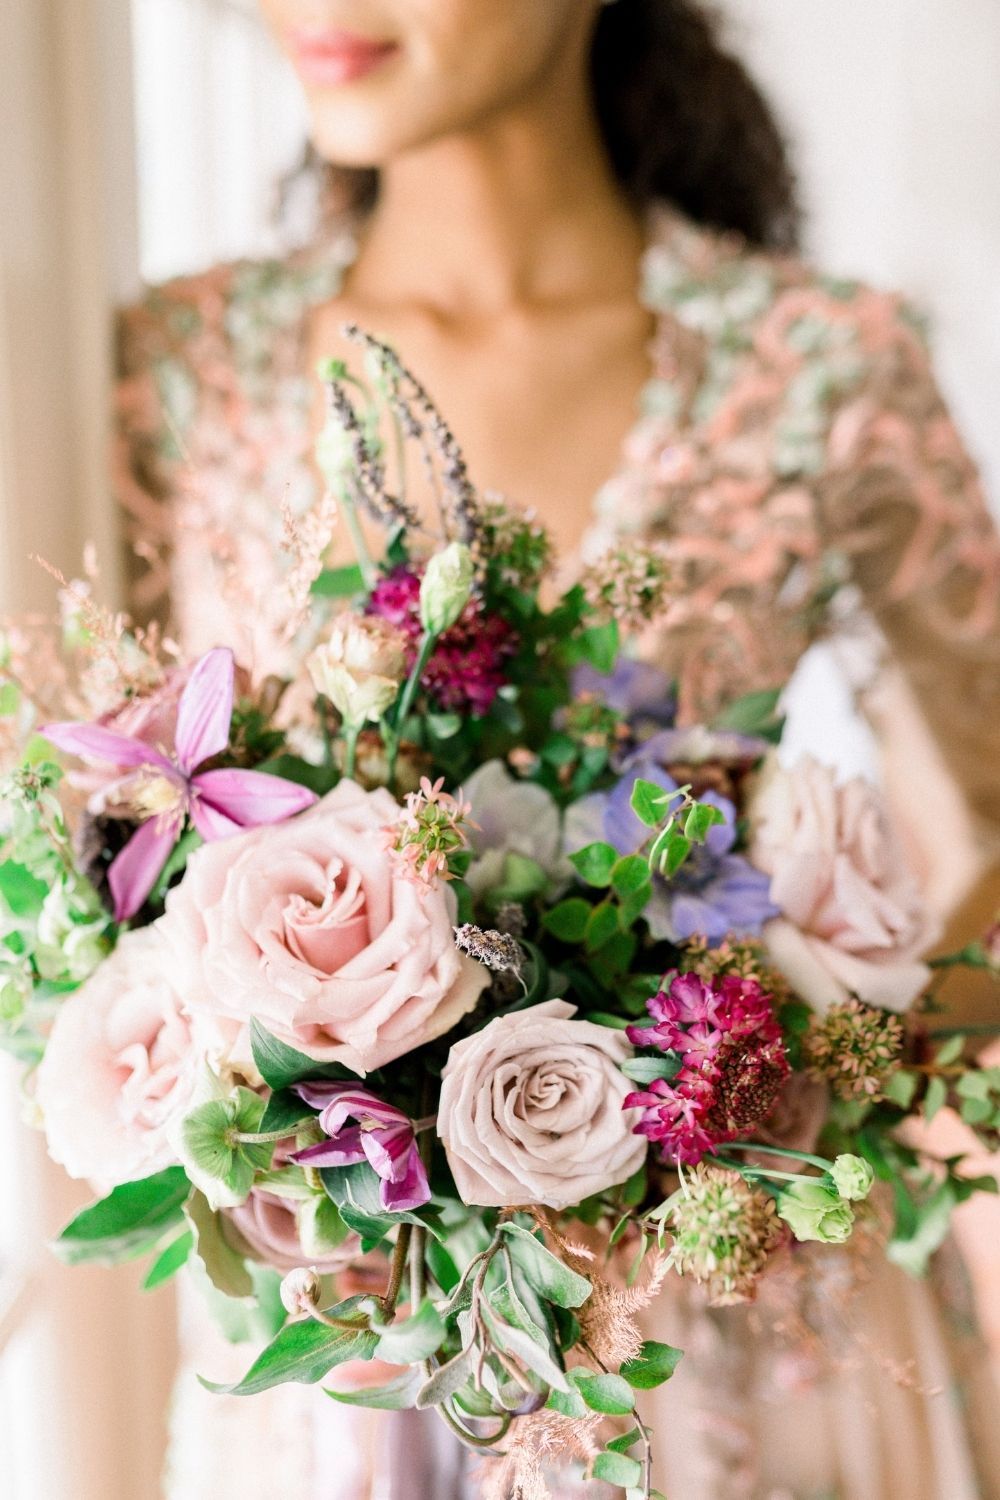 Bride in a pink blush A-line wedding dress with pink and green bouquet